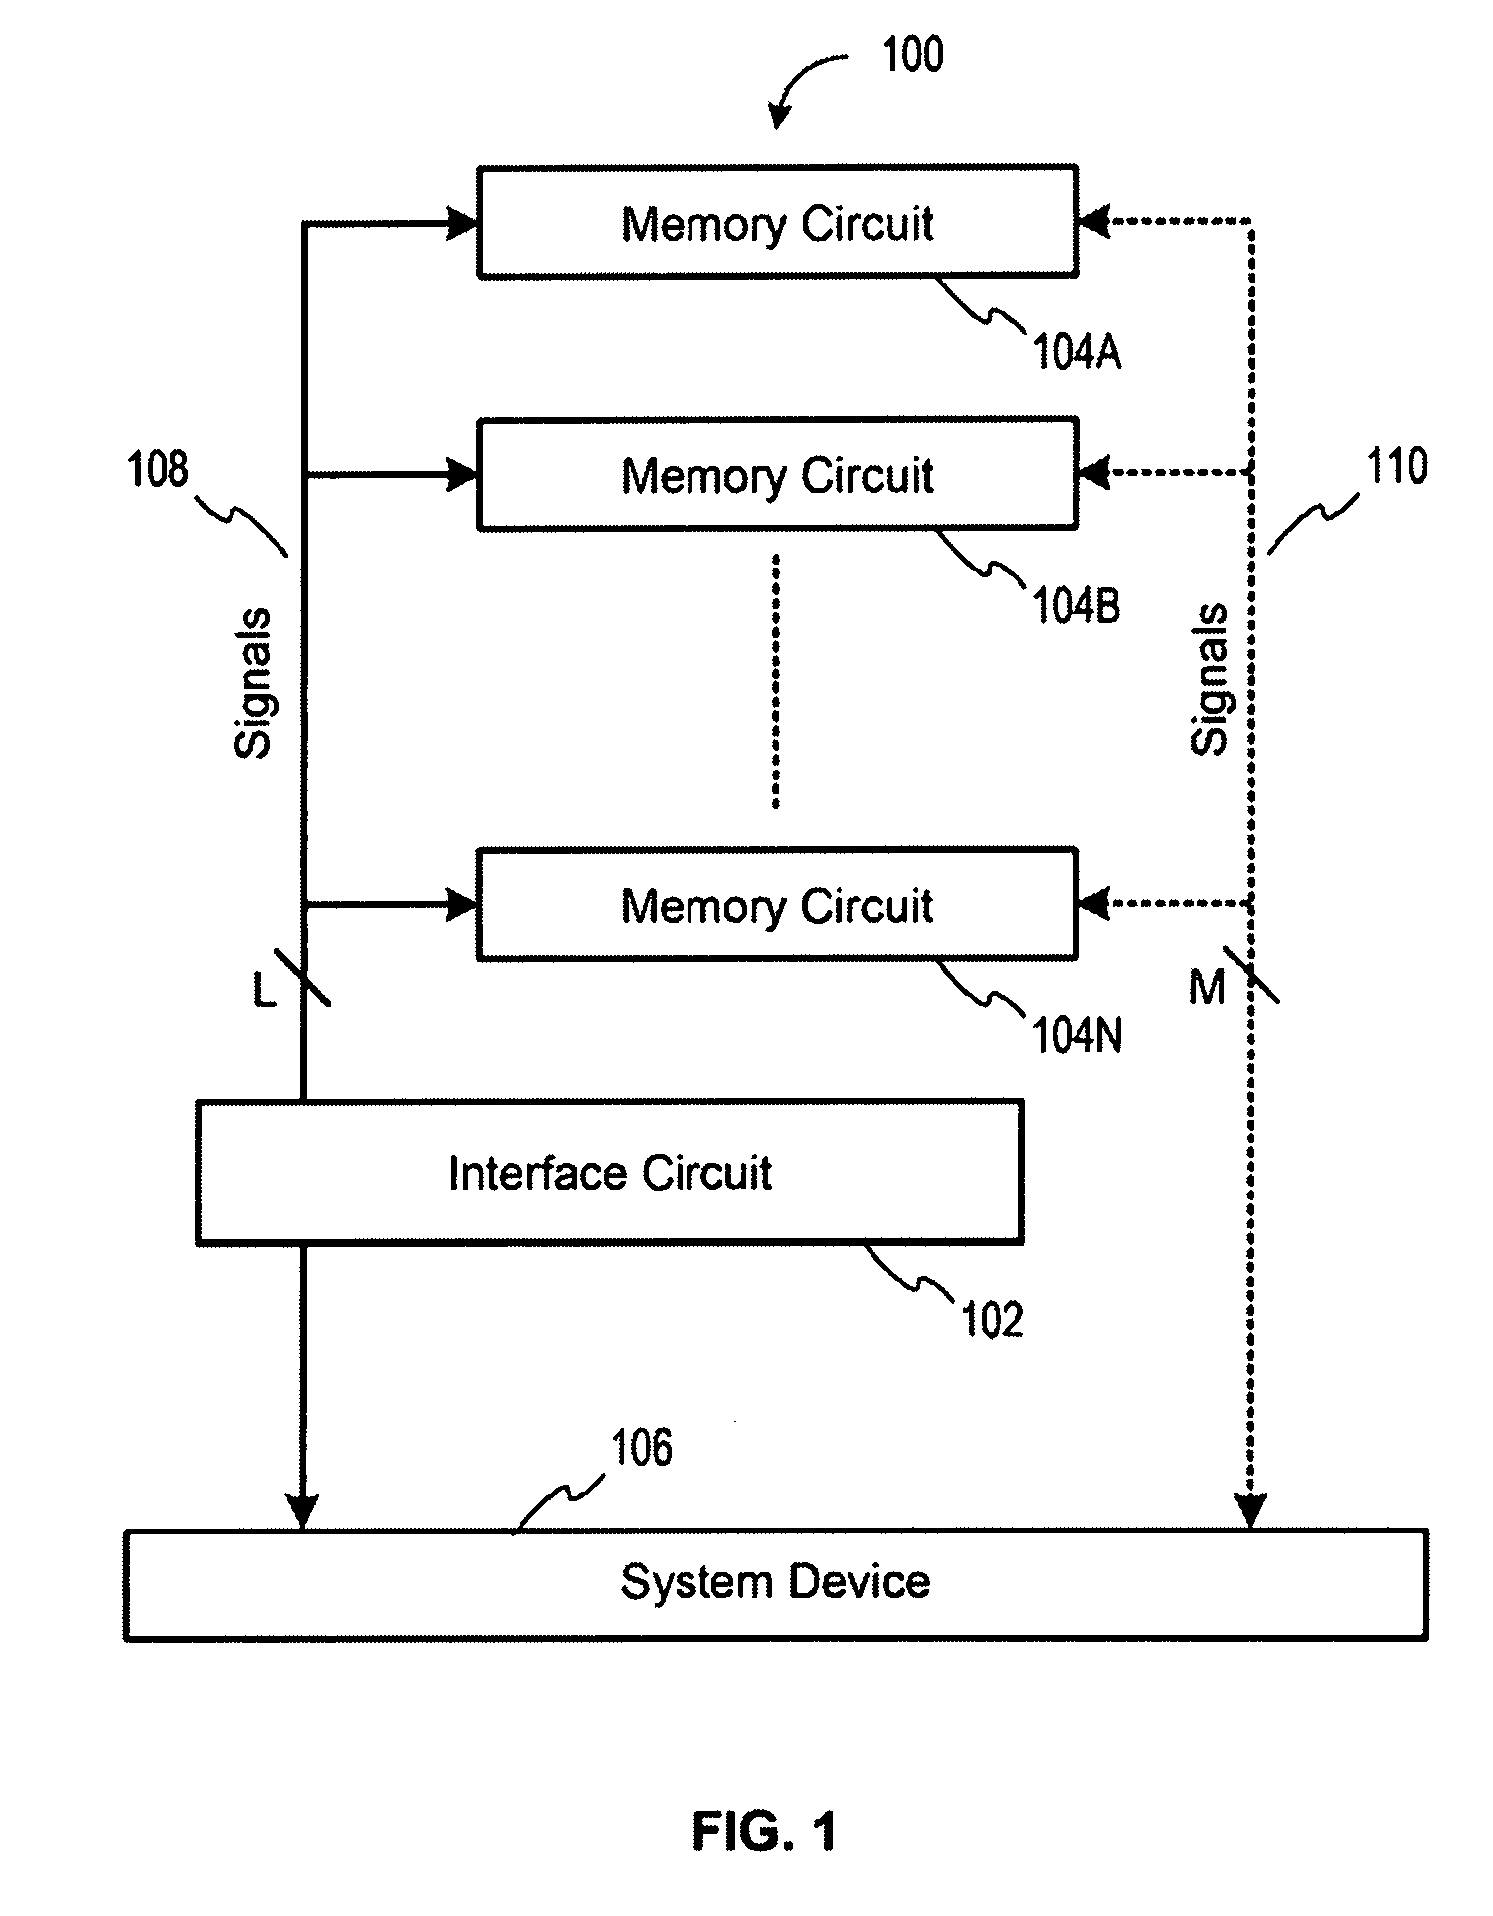 Memory device with emulated characteristics